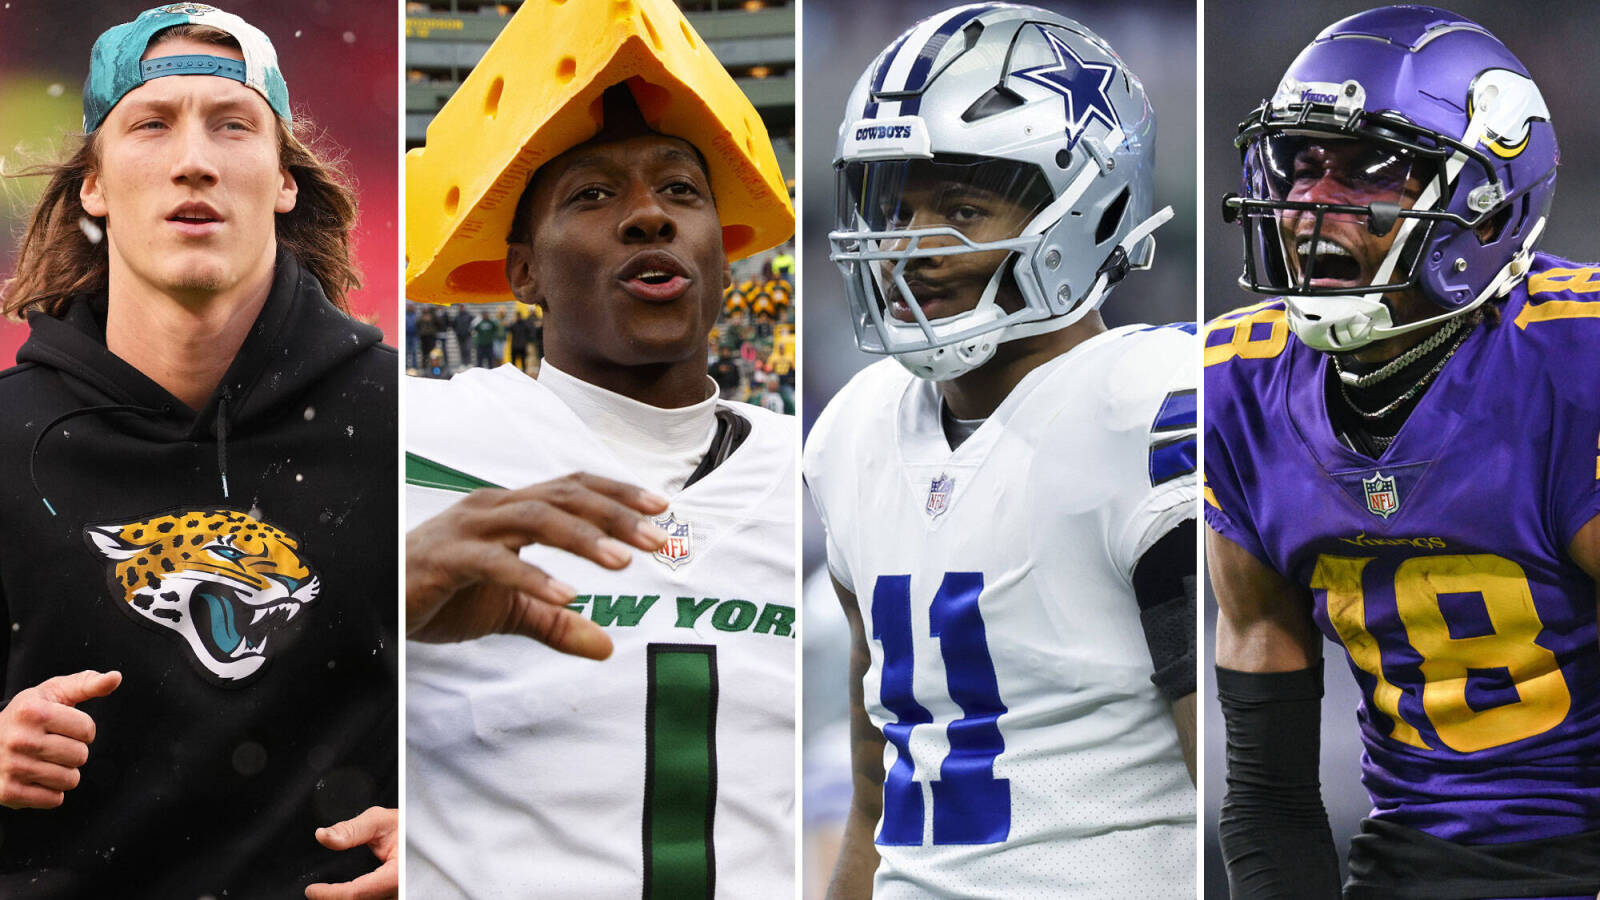 Who are the NFL's top players 25 and under? League coaches, execs